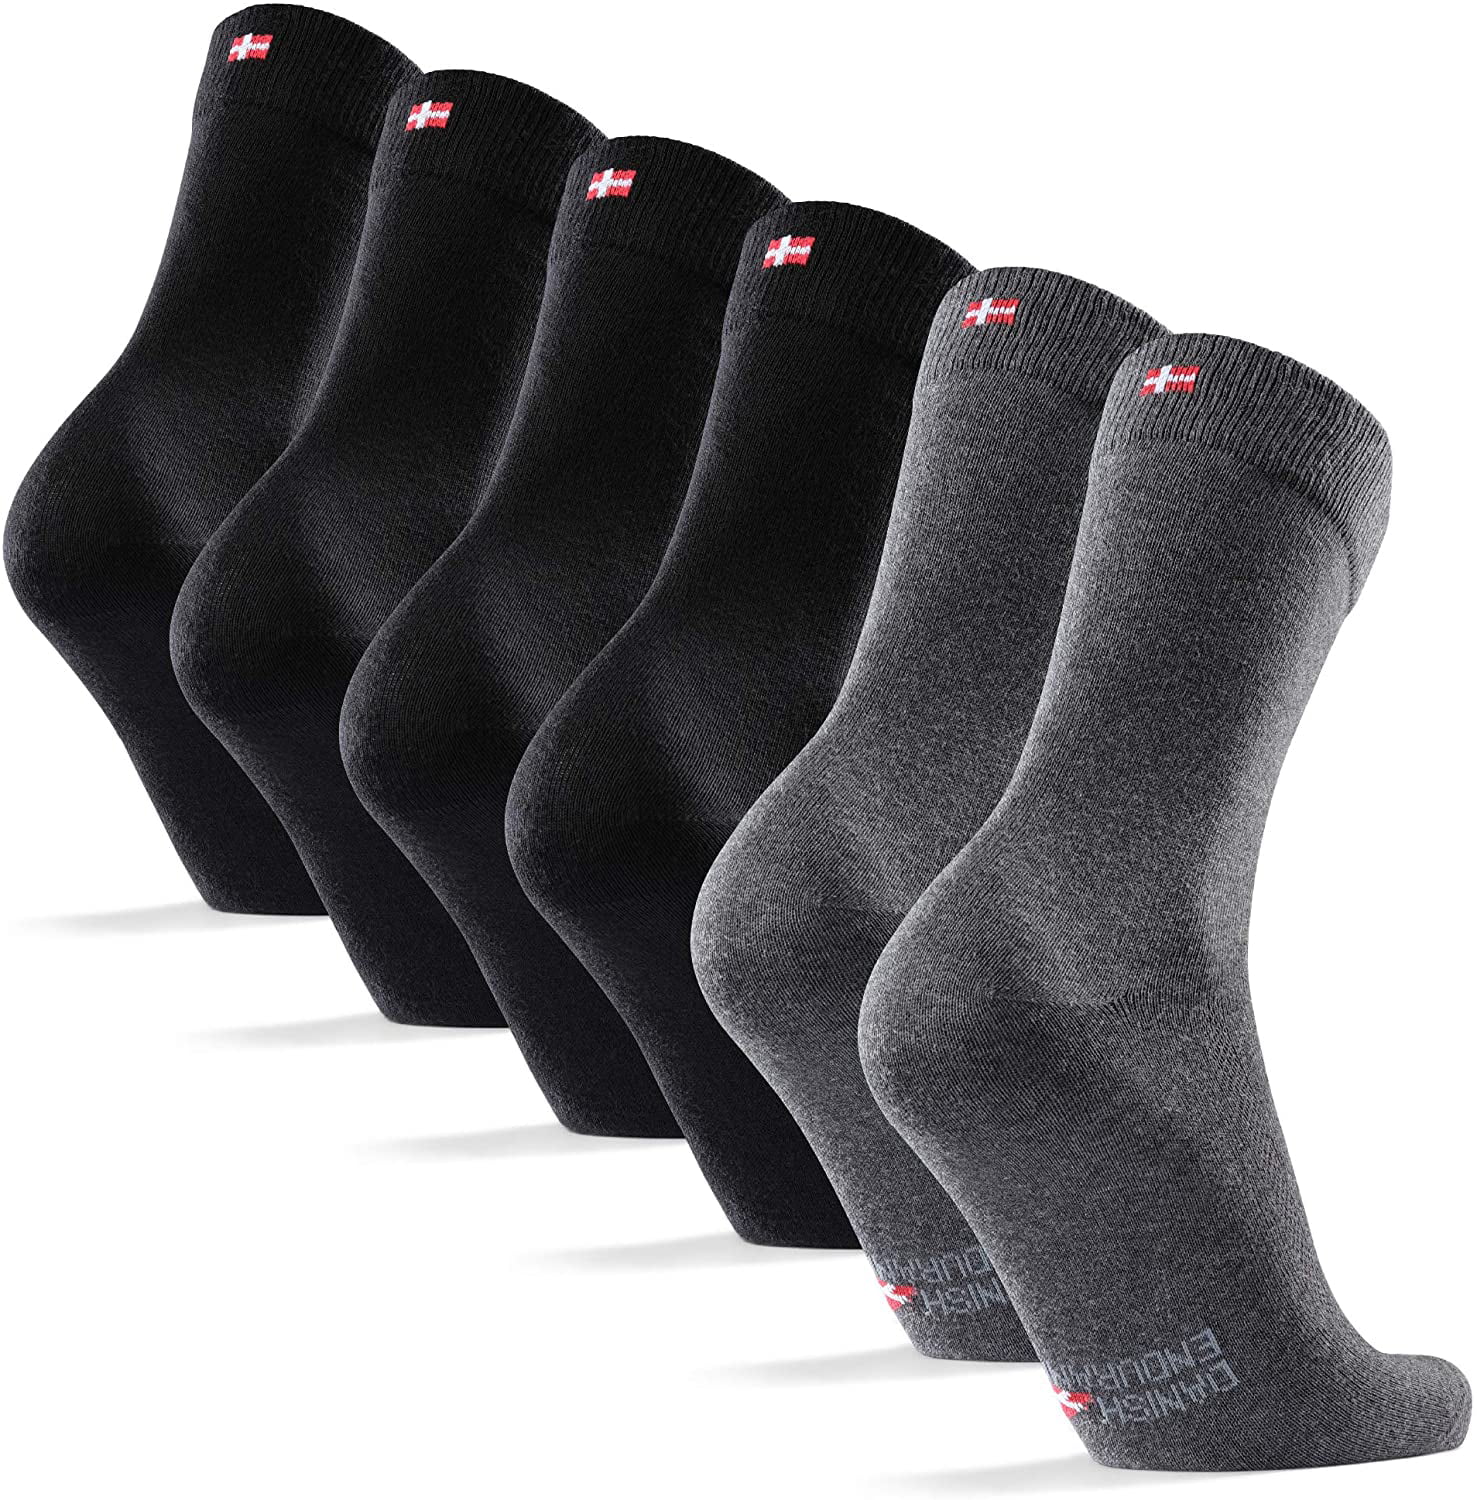 Black Comfortable Calf For Business and Everyday Soft Grey Red Organic Cotton With Breathable Cooling Lanes 3 Pack Basic Classic Organic Cotton Dress Socks Blue for Men & Women